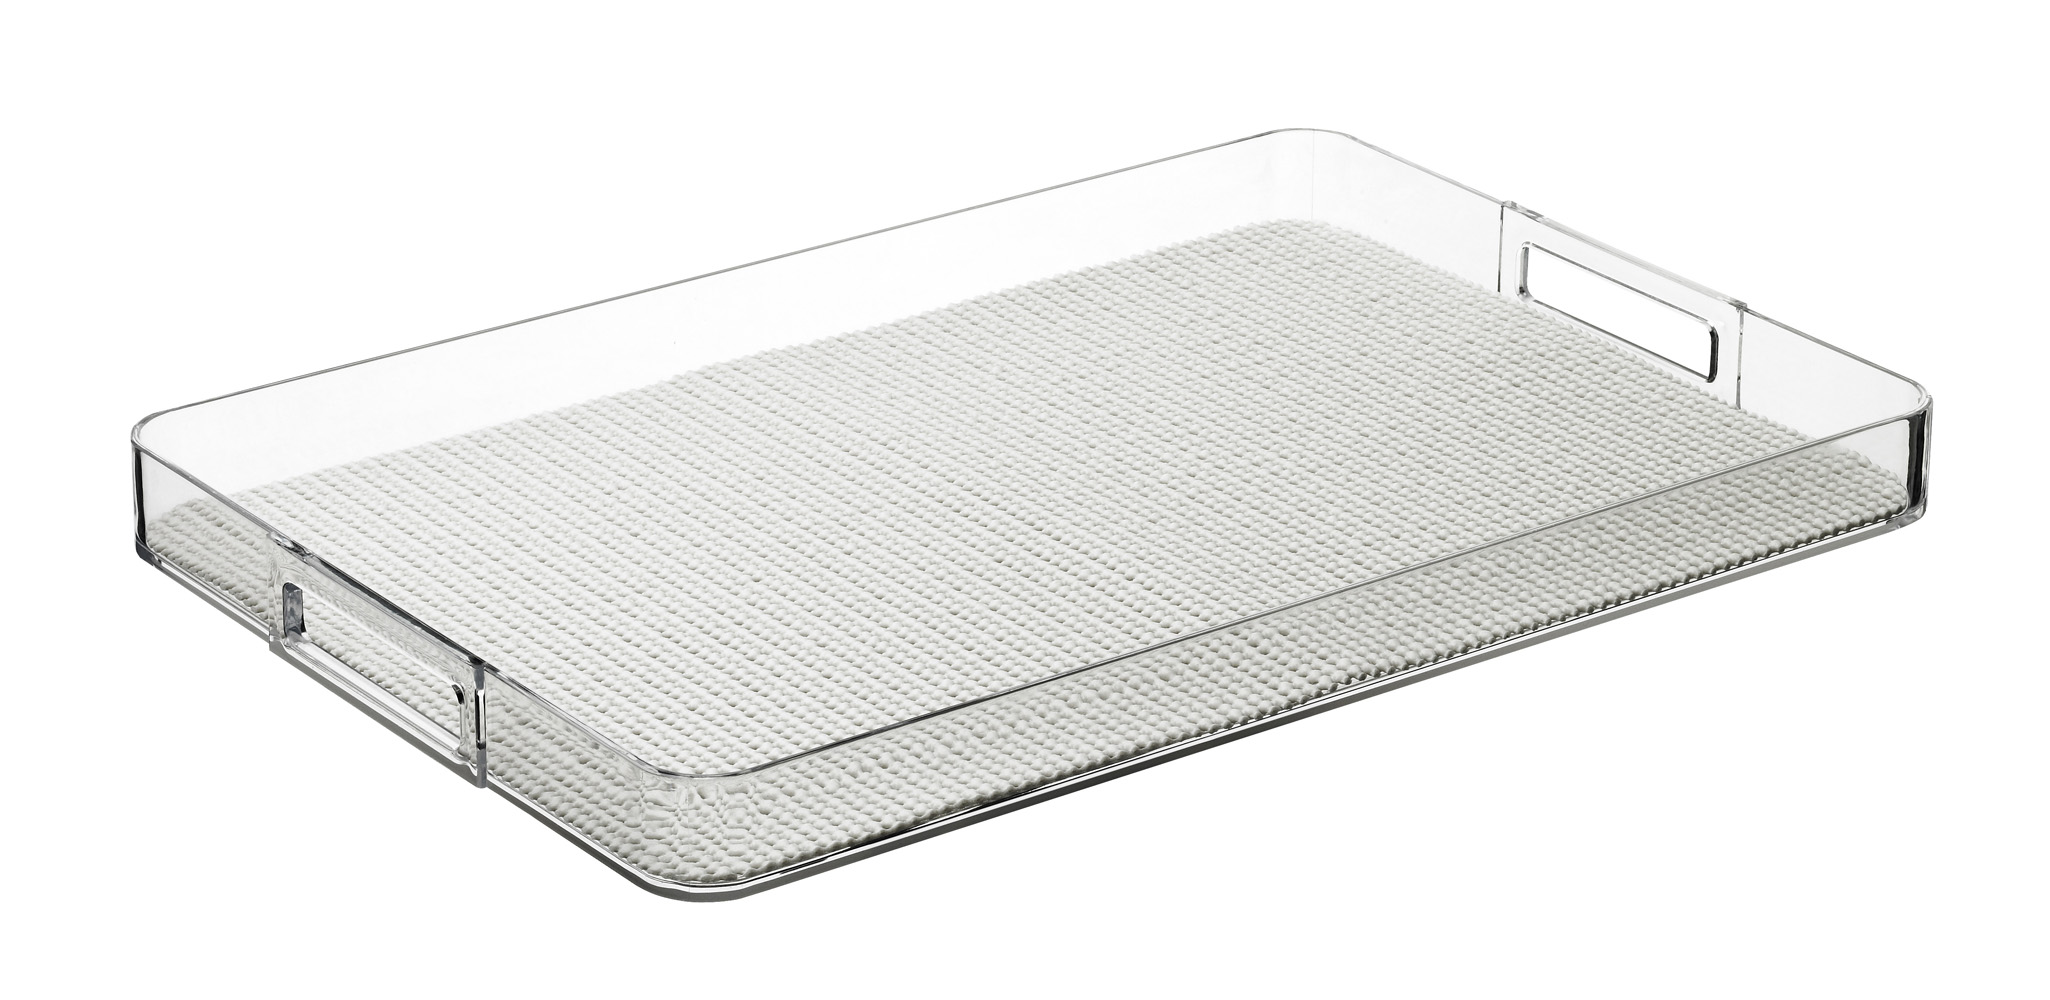 Kraftware 32729 Fishnet Rect. Handled Galery Tray 20 In. X 14 In. White